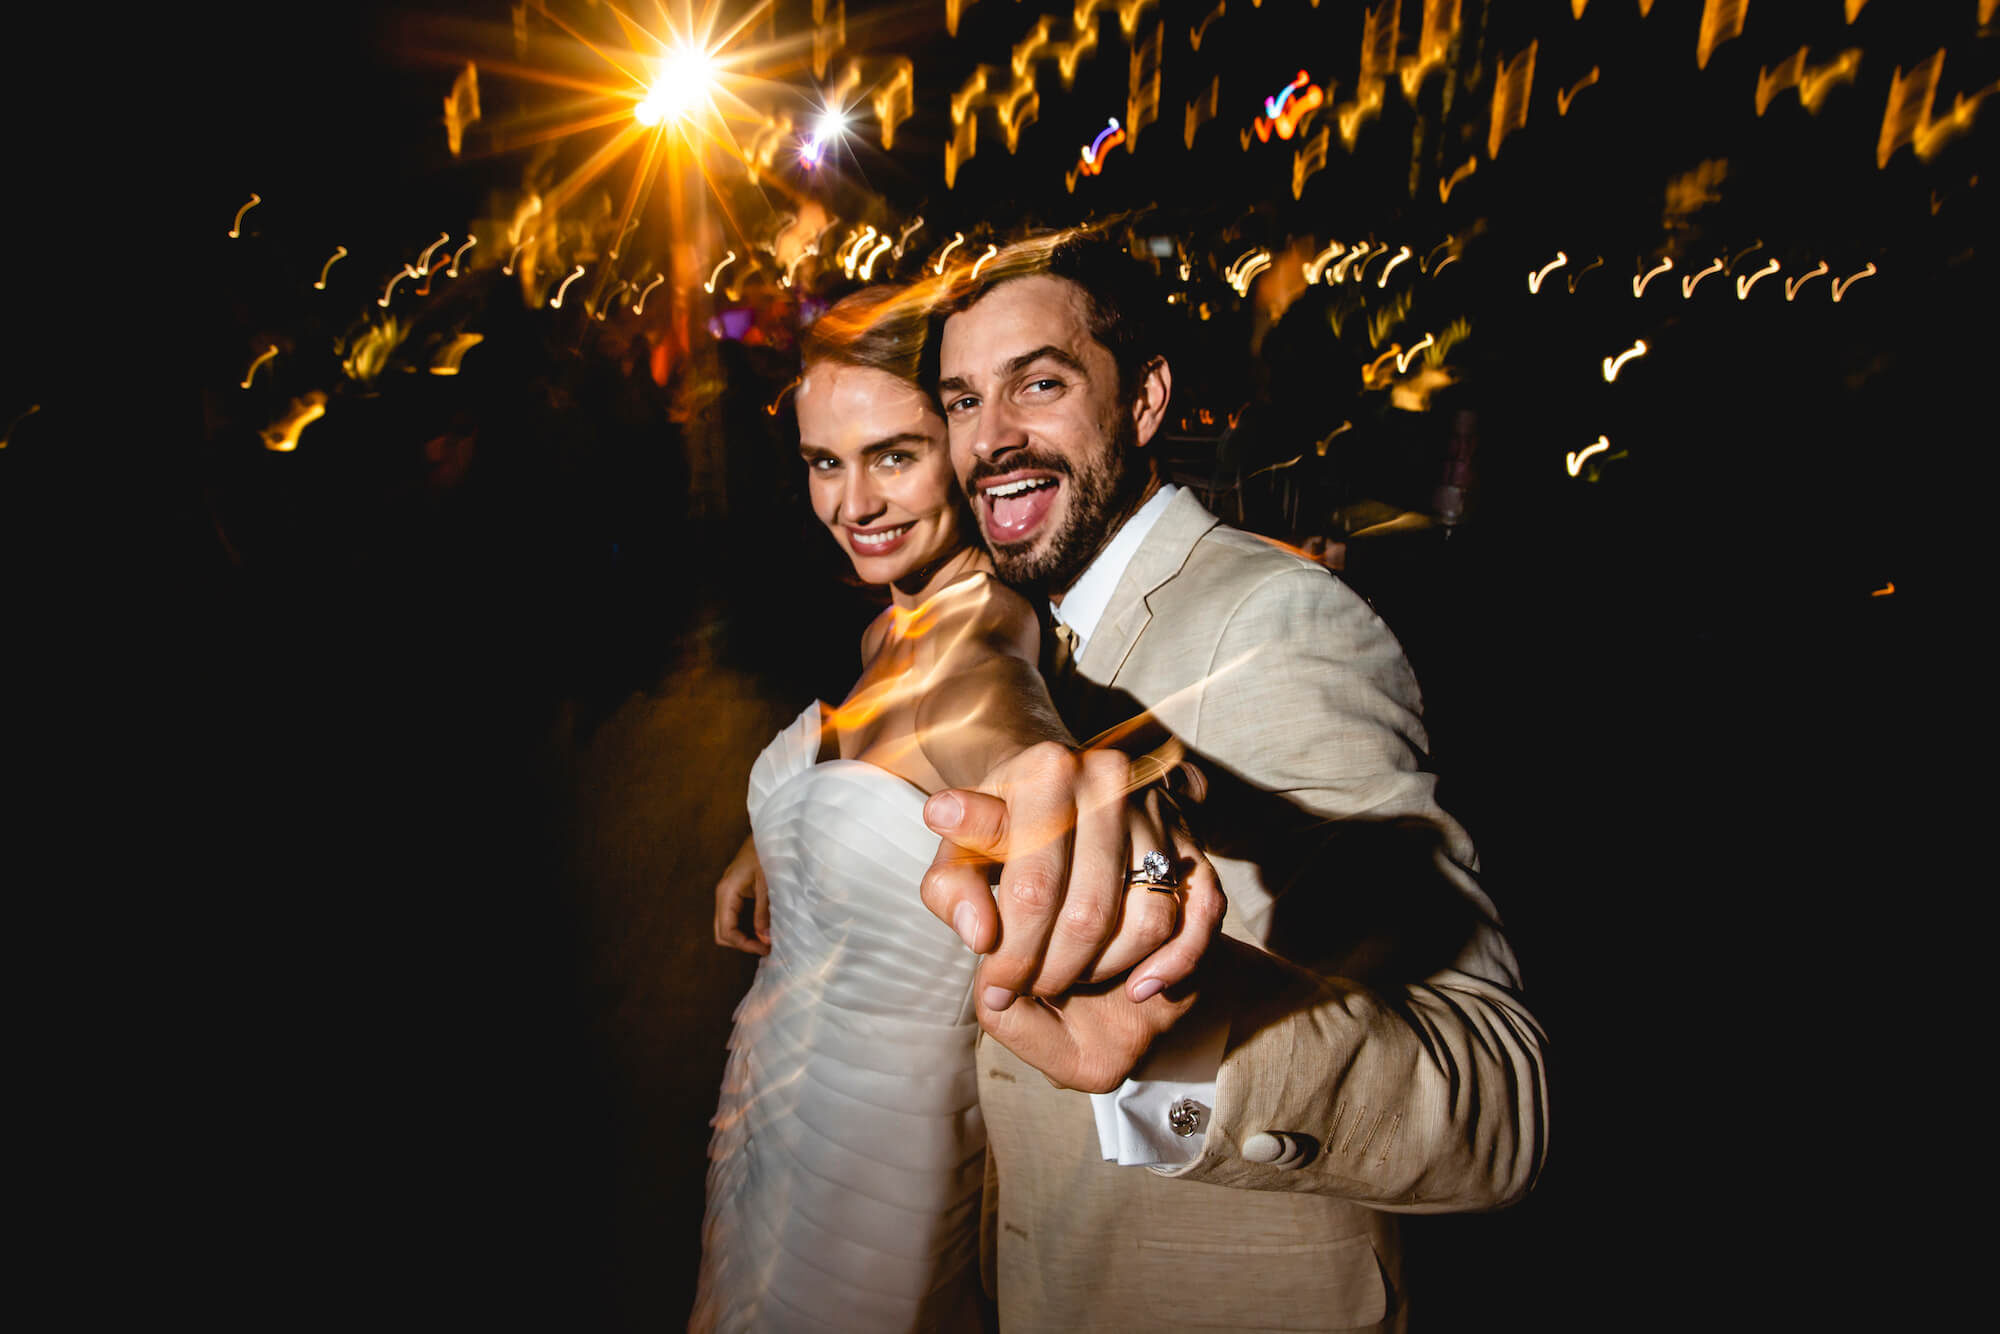 We love to play with the lights to achieve a beautiful wedding portrait